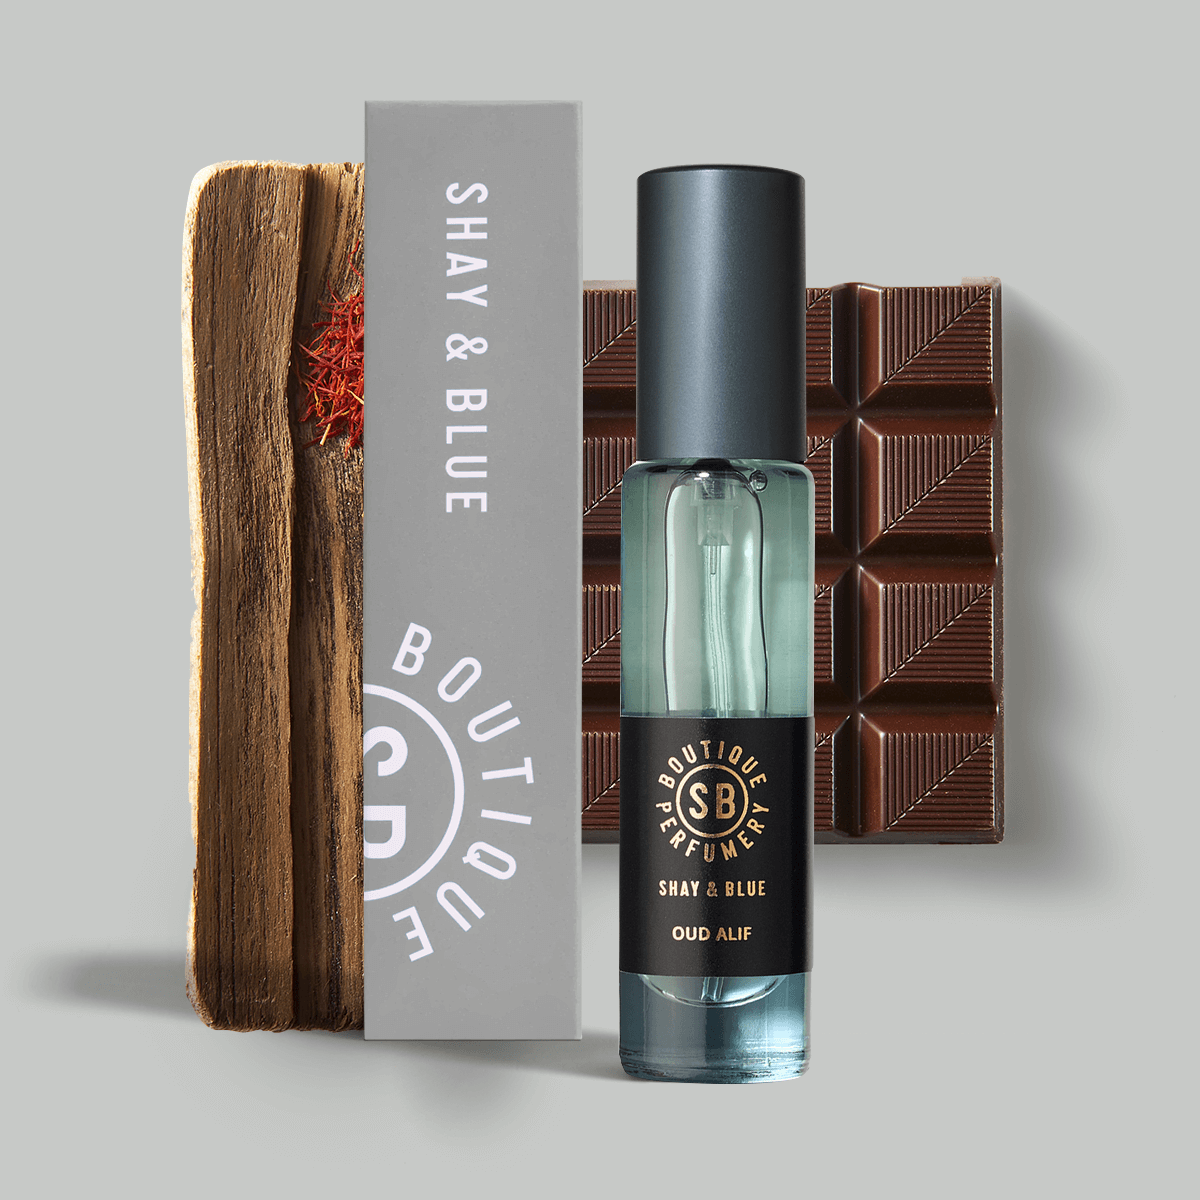 Oud Alif Fragrance Concentrate 10ml | The finest oud agarwood spiked with chocolat noir, saffron and dark patchouli. | Clean All Gender Fragrance | Shay & Blue